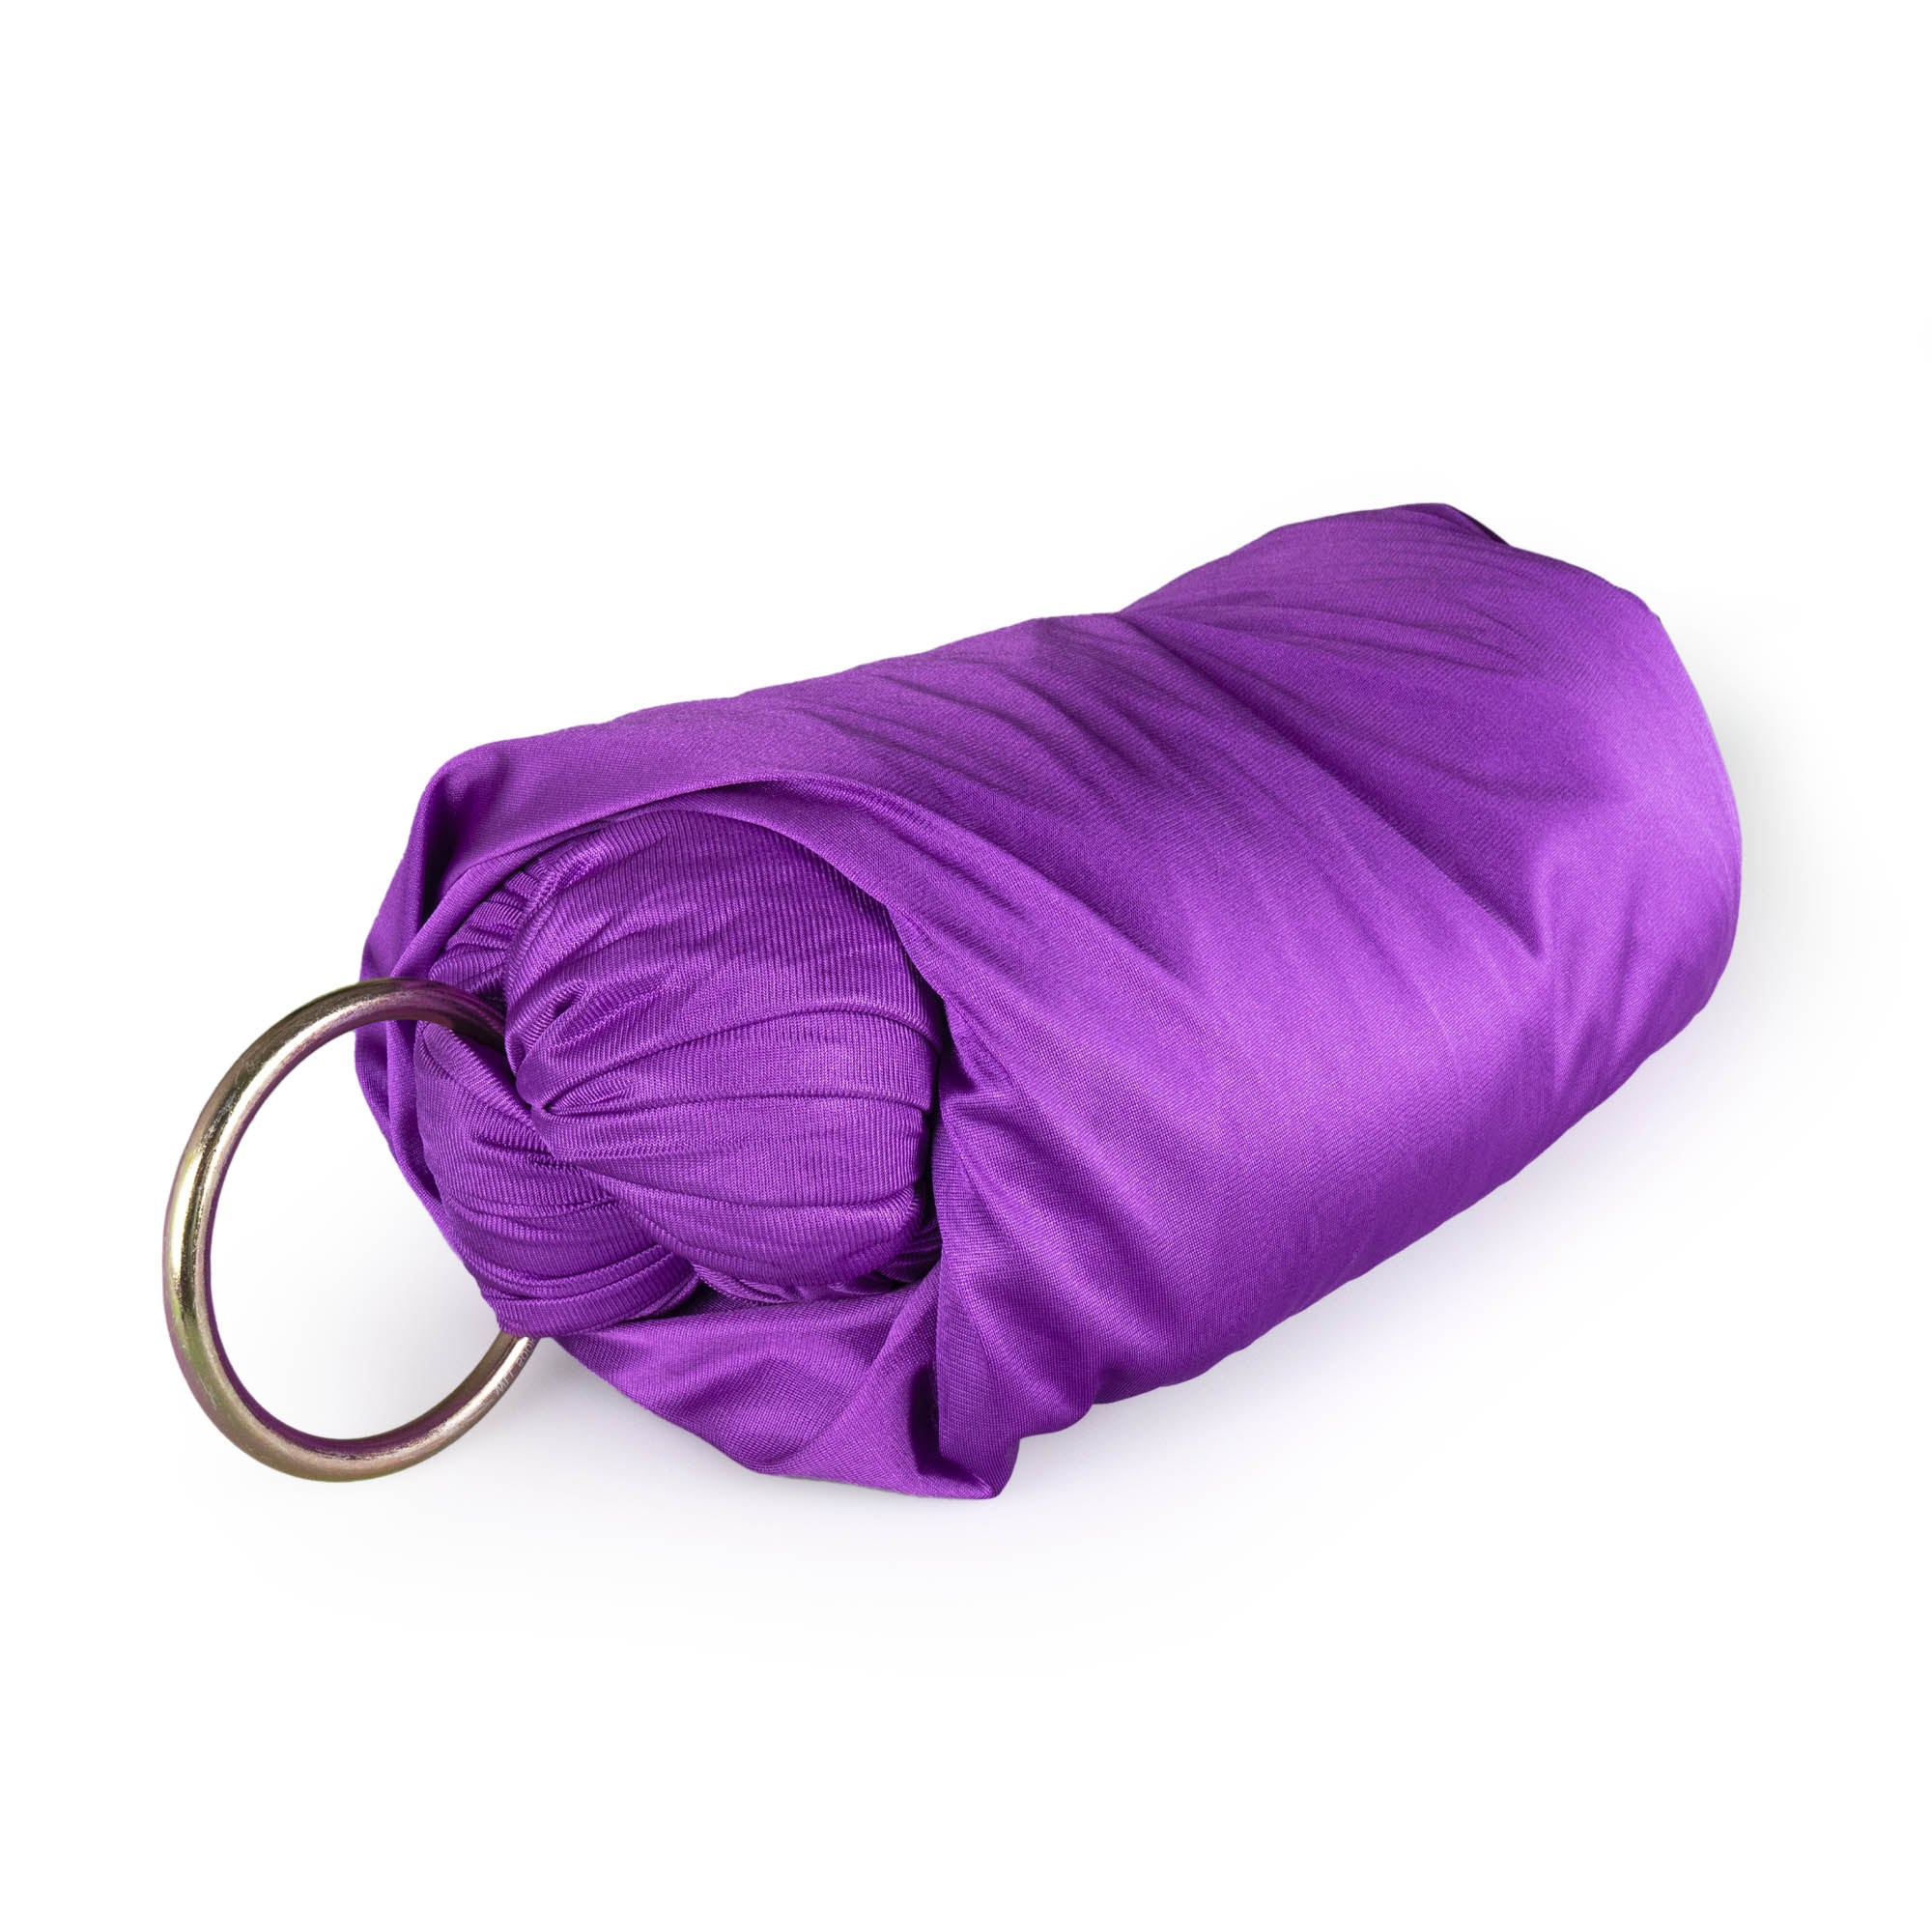 Purple yoga hammock with O rings attached